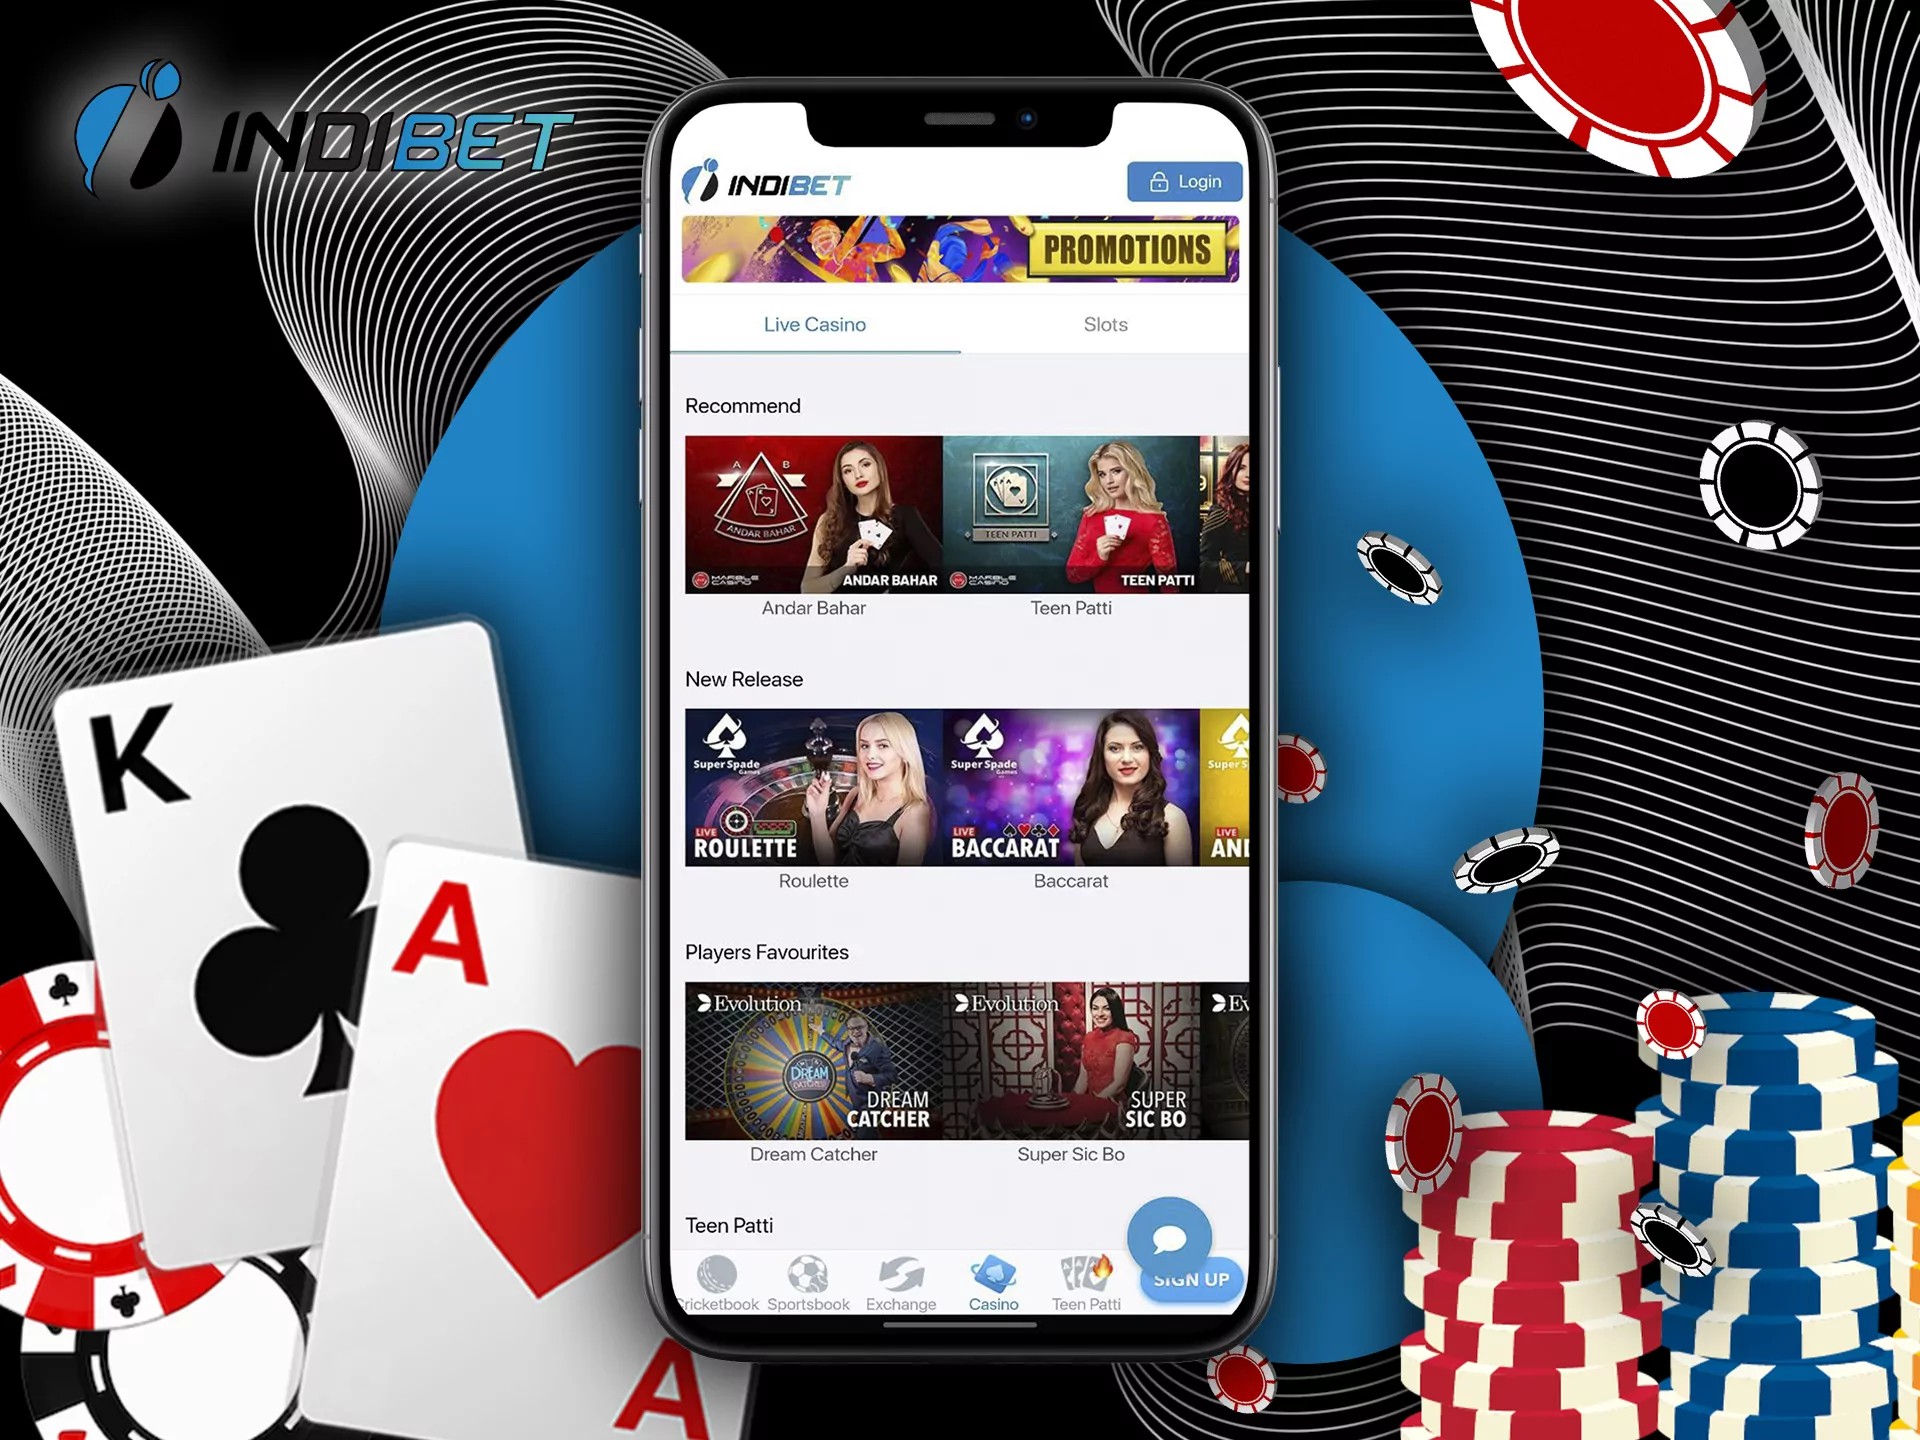 Play casino slots in the 'Casino' section of the Indibet bet.